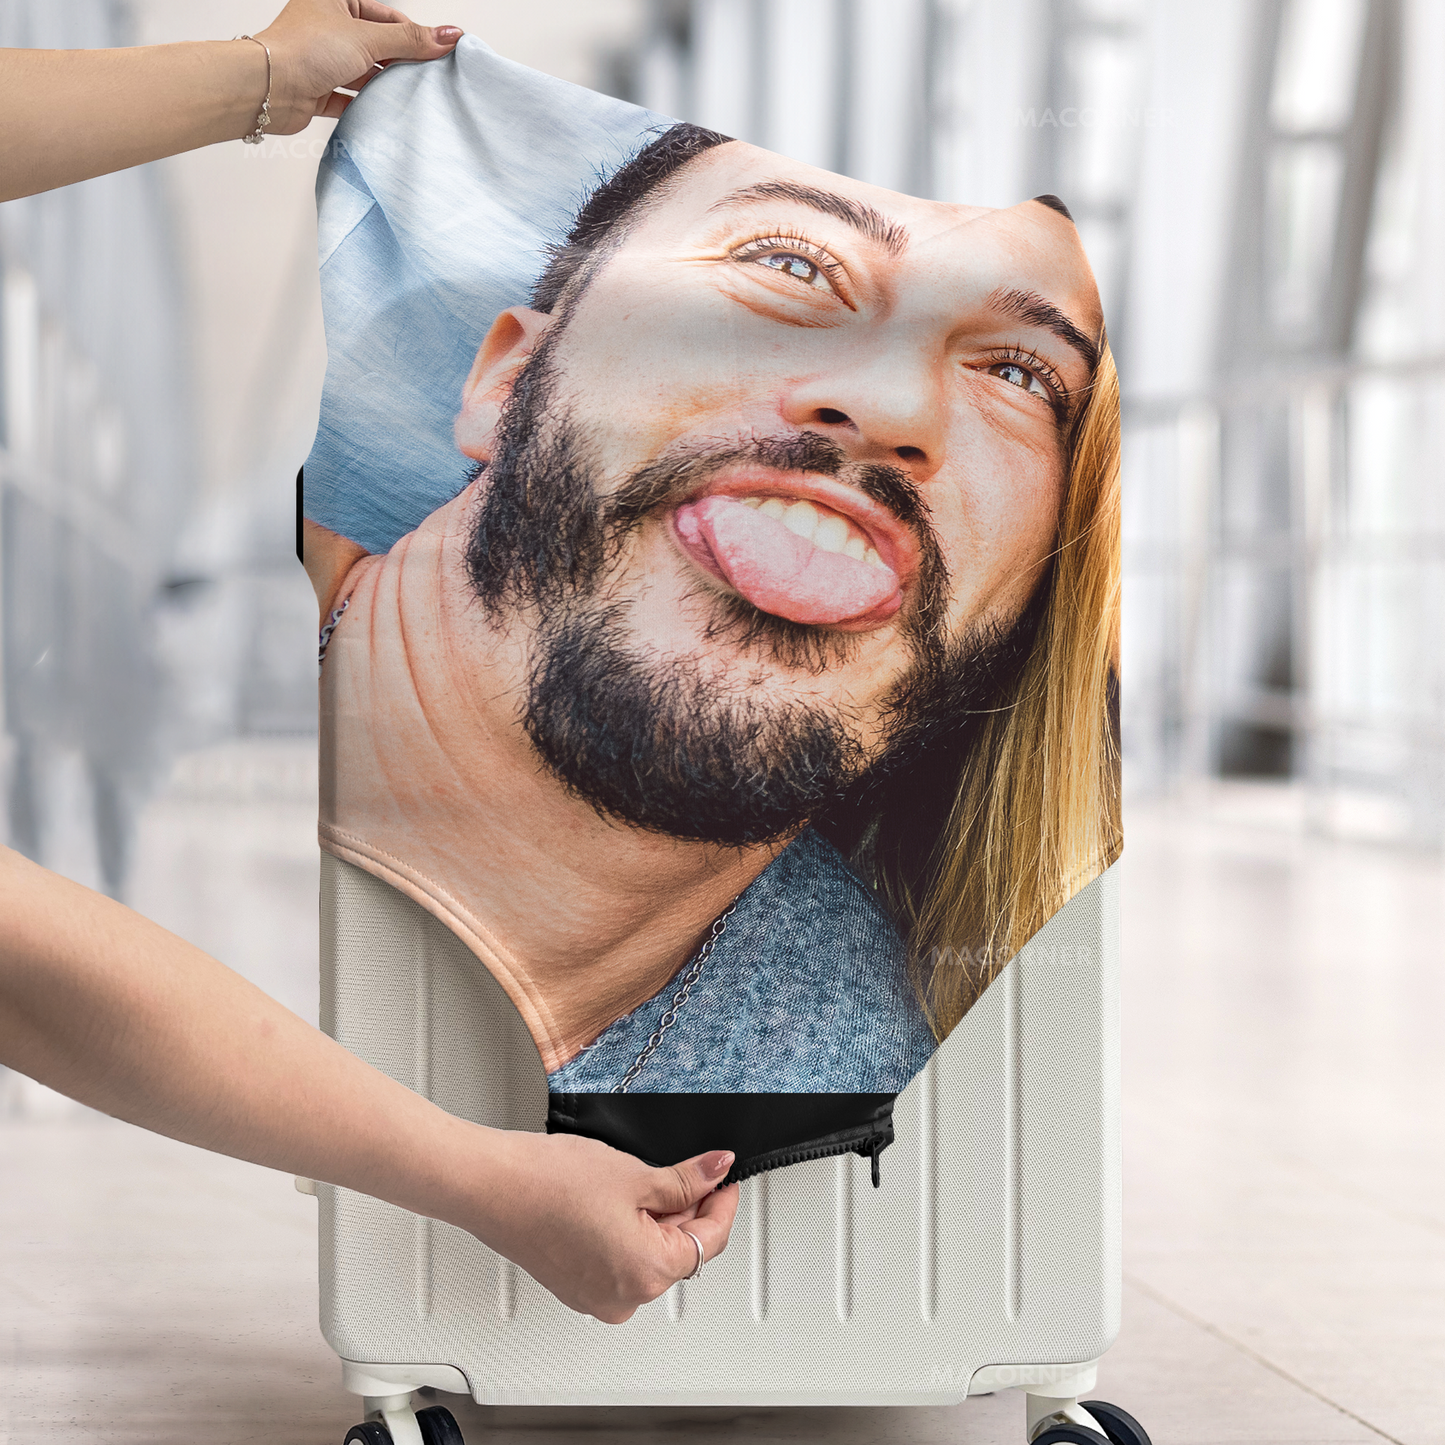 Custom Funny Photo For Friends Family Vacation Traveling - Personalized Photo Luggage Cover